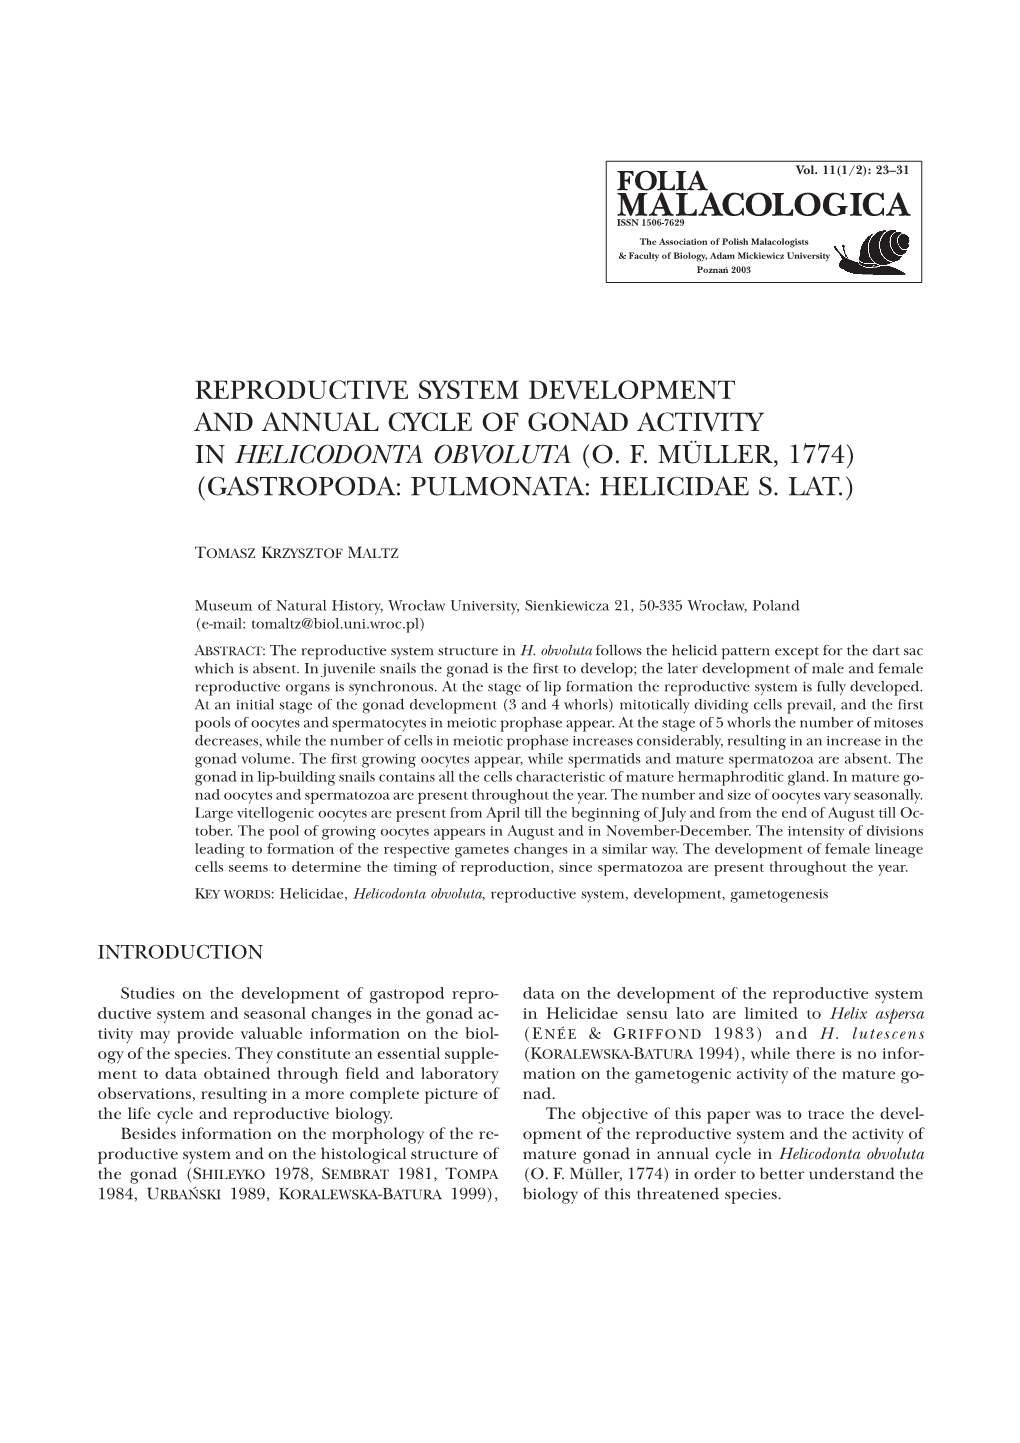 Reproductive System Development and Annual Cycle of Gonad Activity in Helicodonta Obvoluta (O